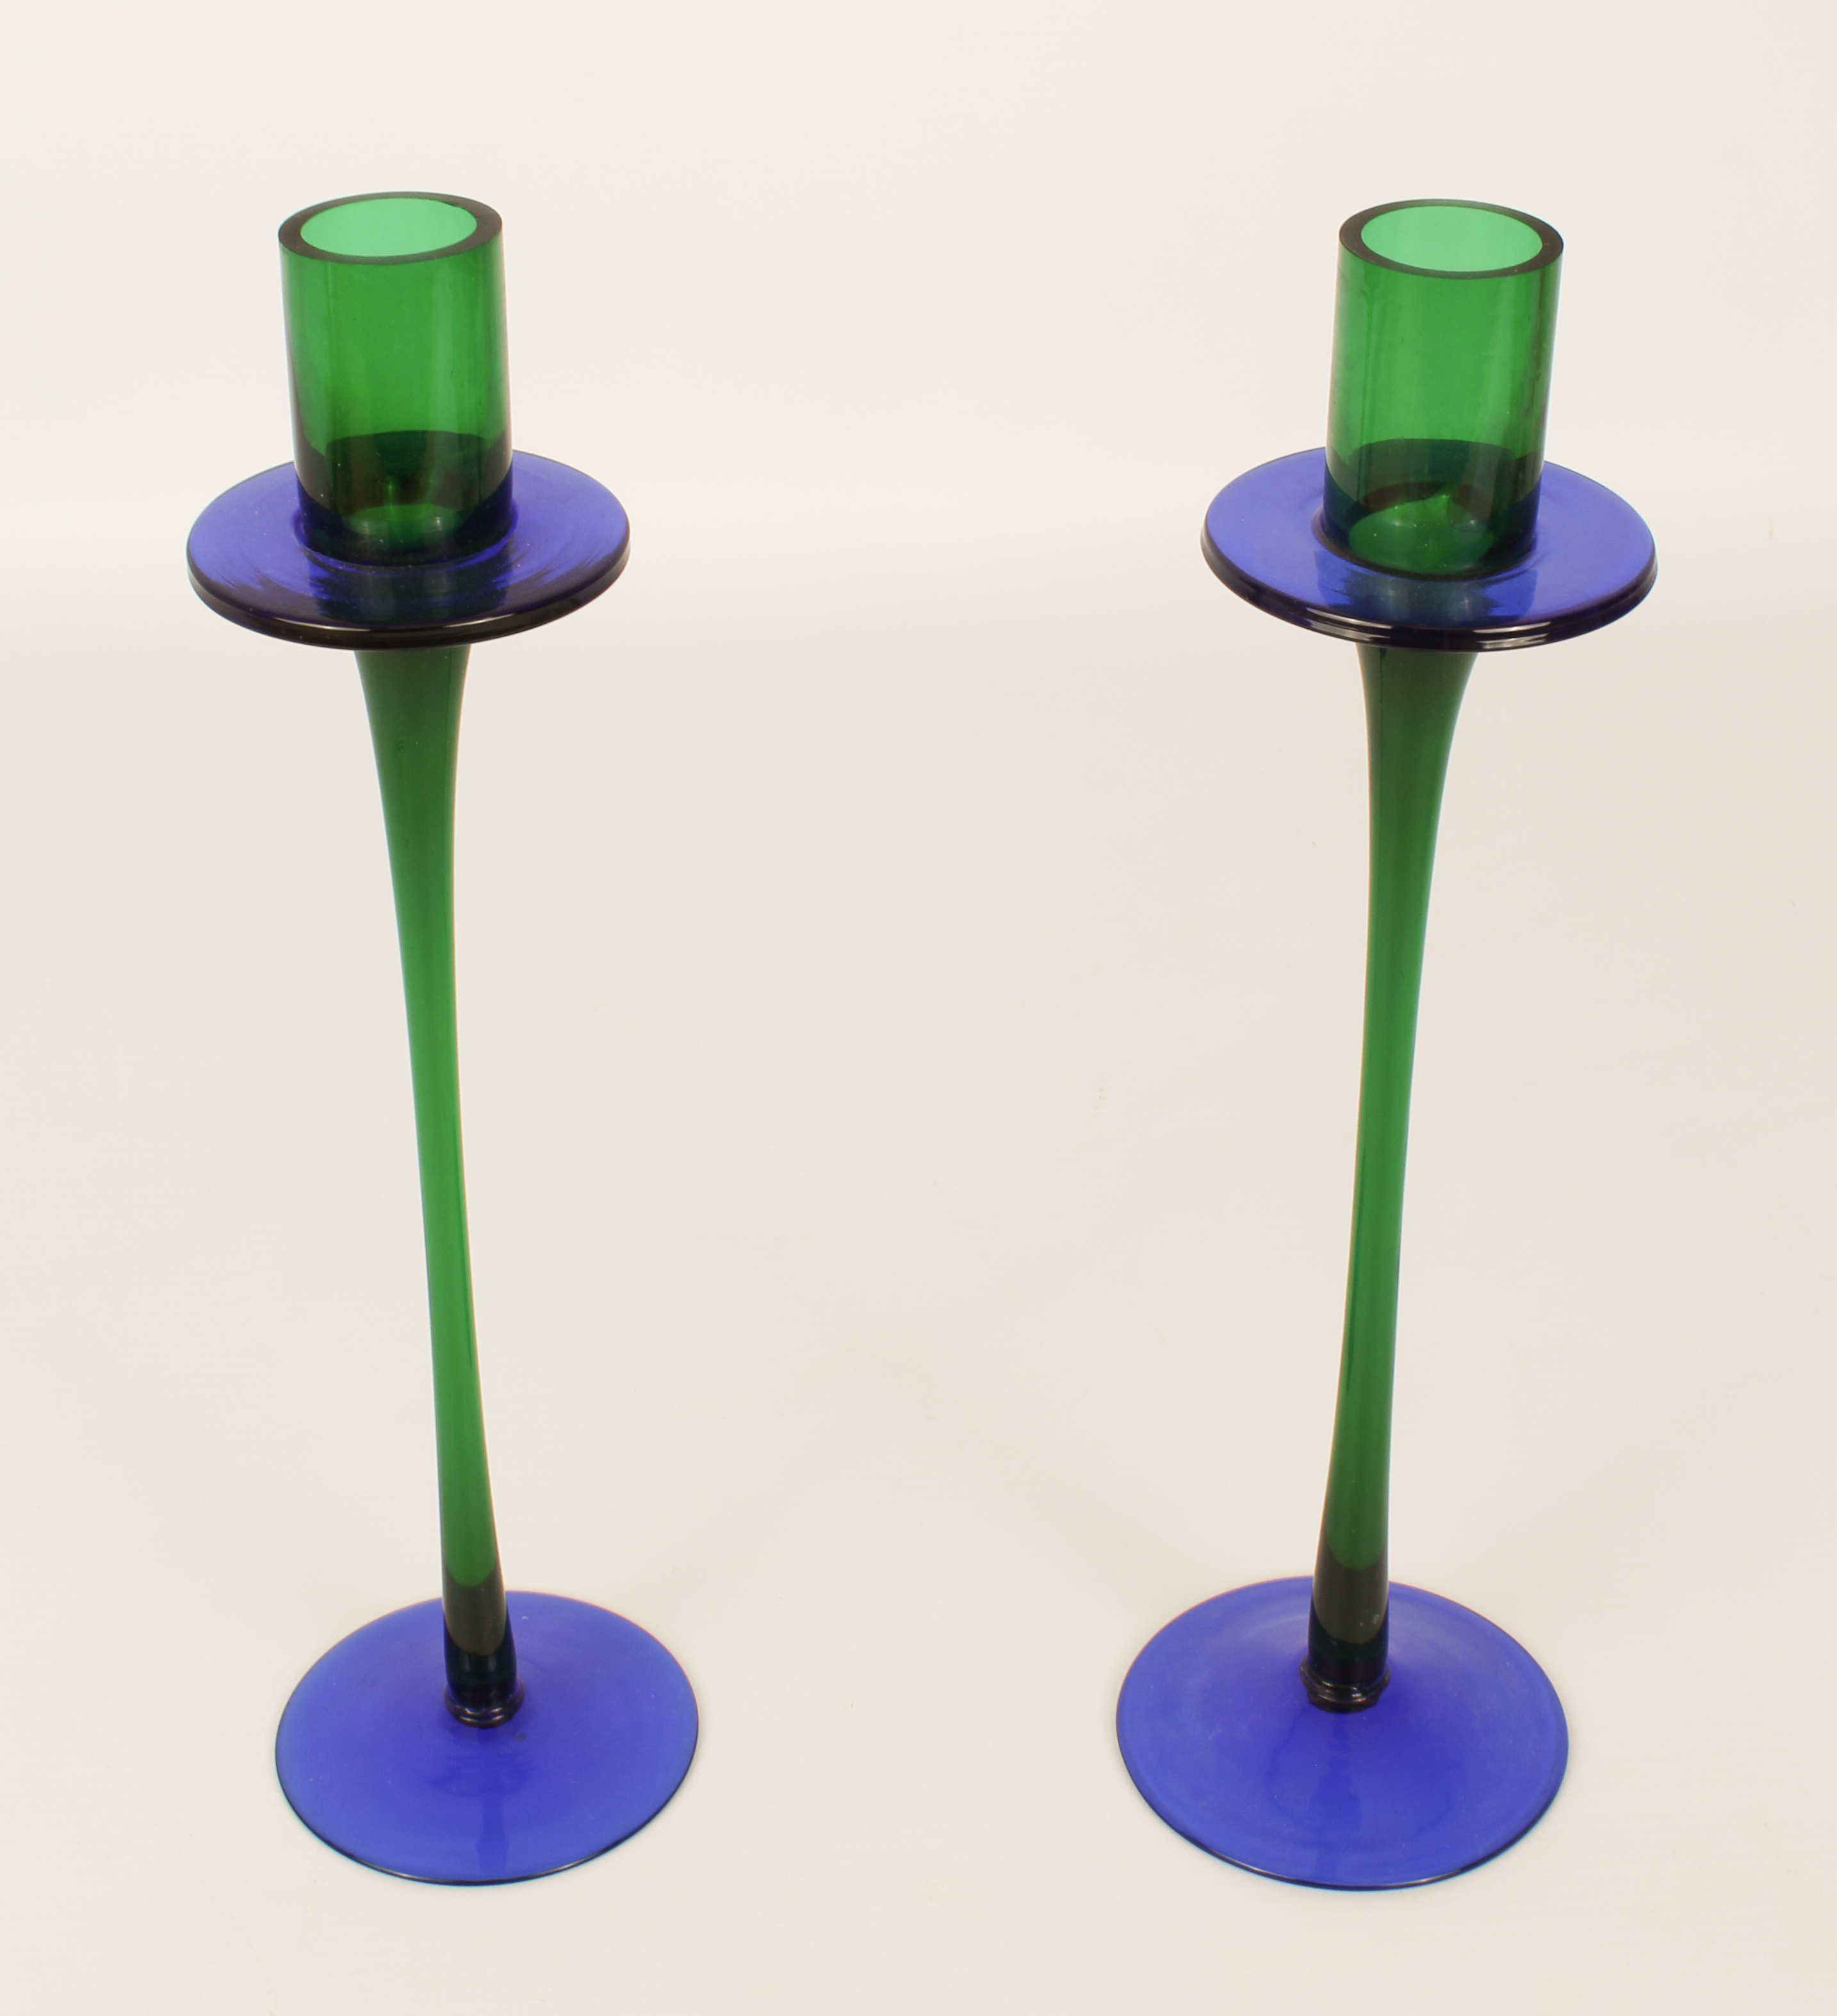 A pair of retro green and blue art glass candlesticks - 1980s, blown glass, with cylindrical nozzles - Image 4 of 4